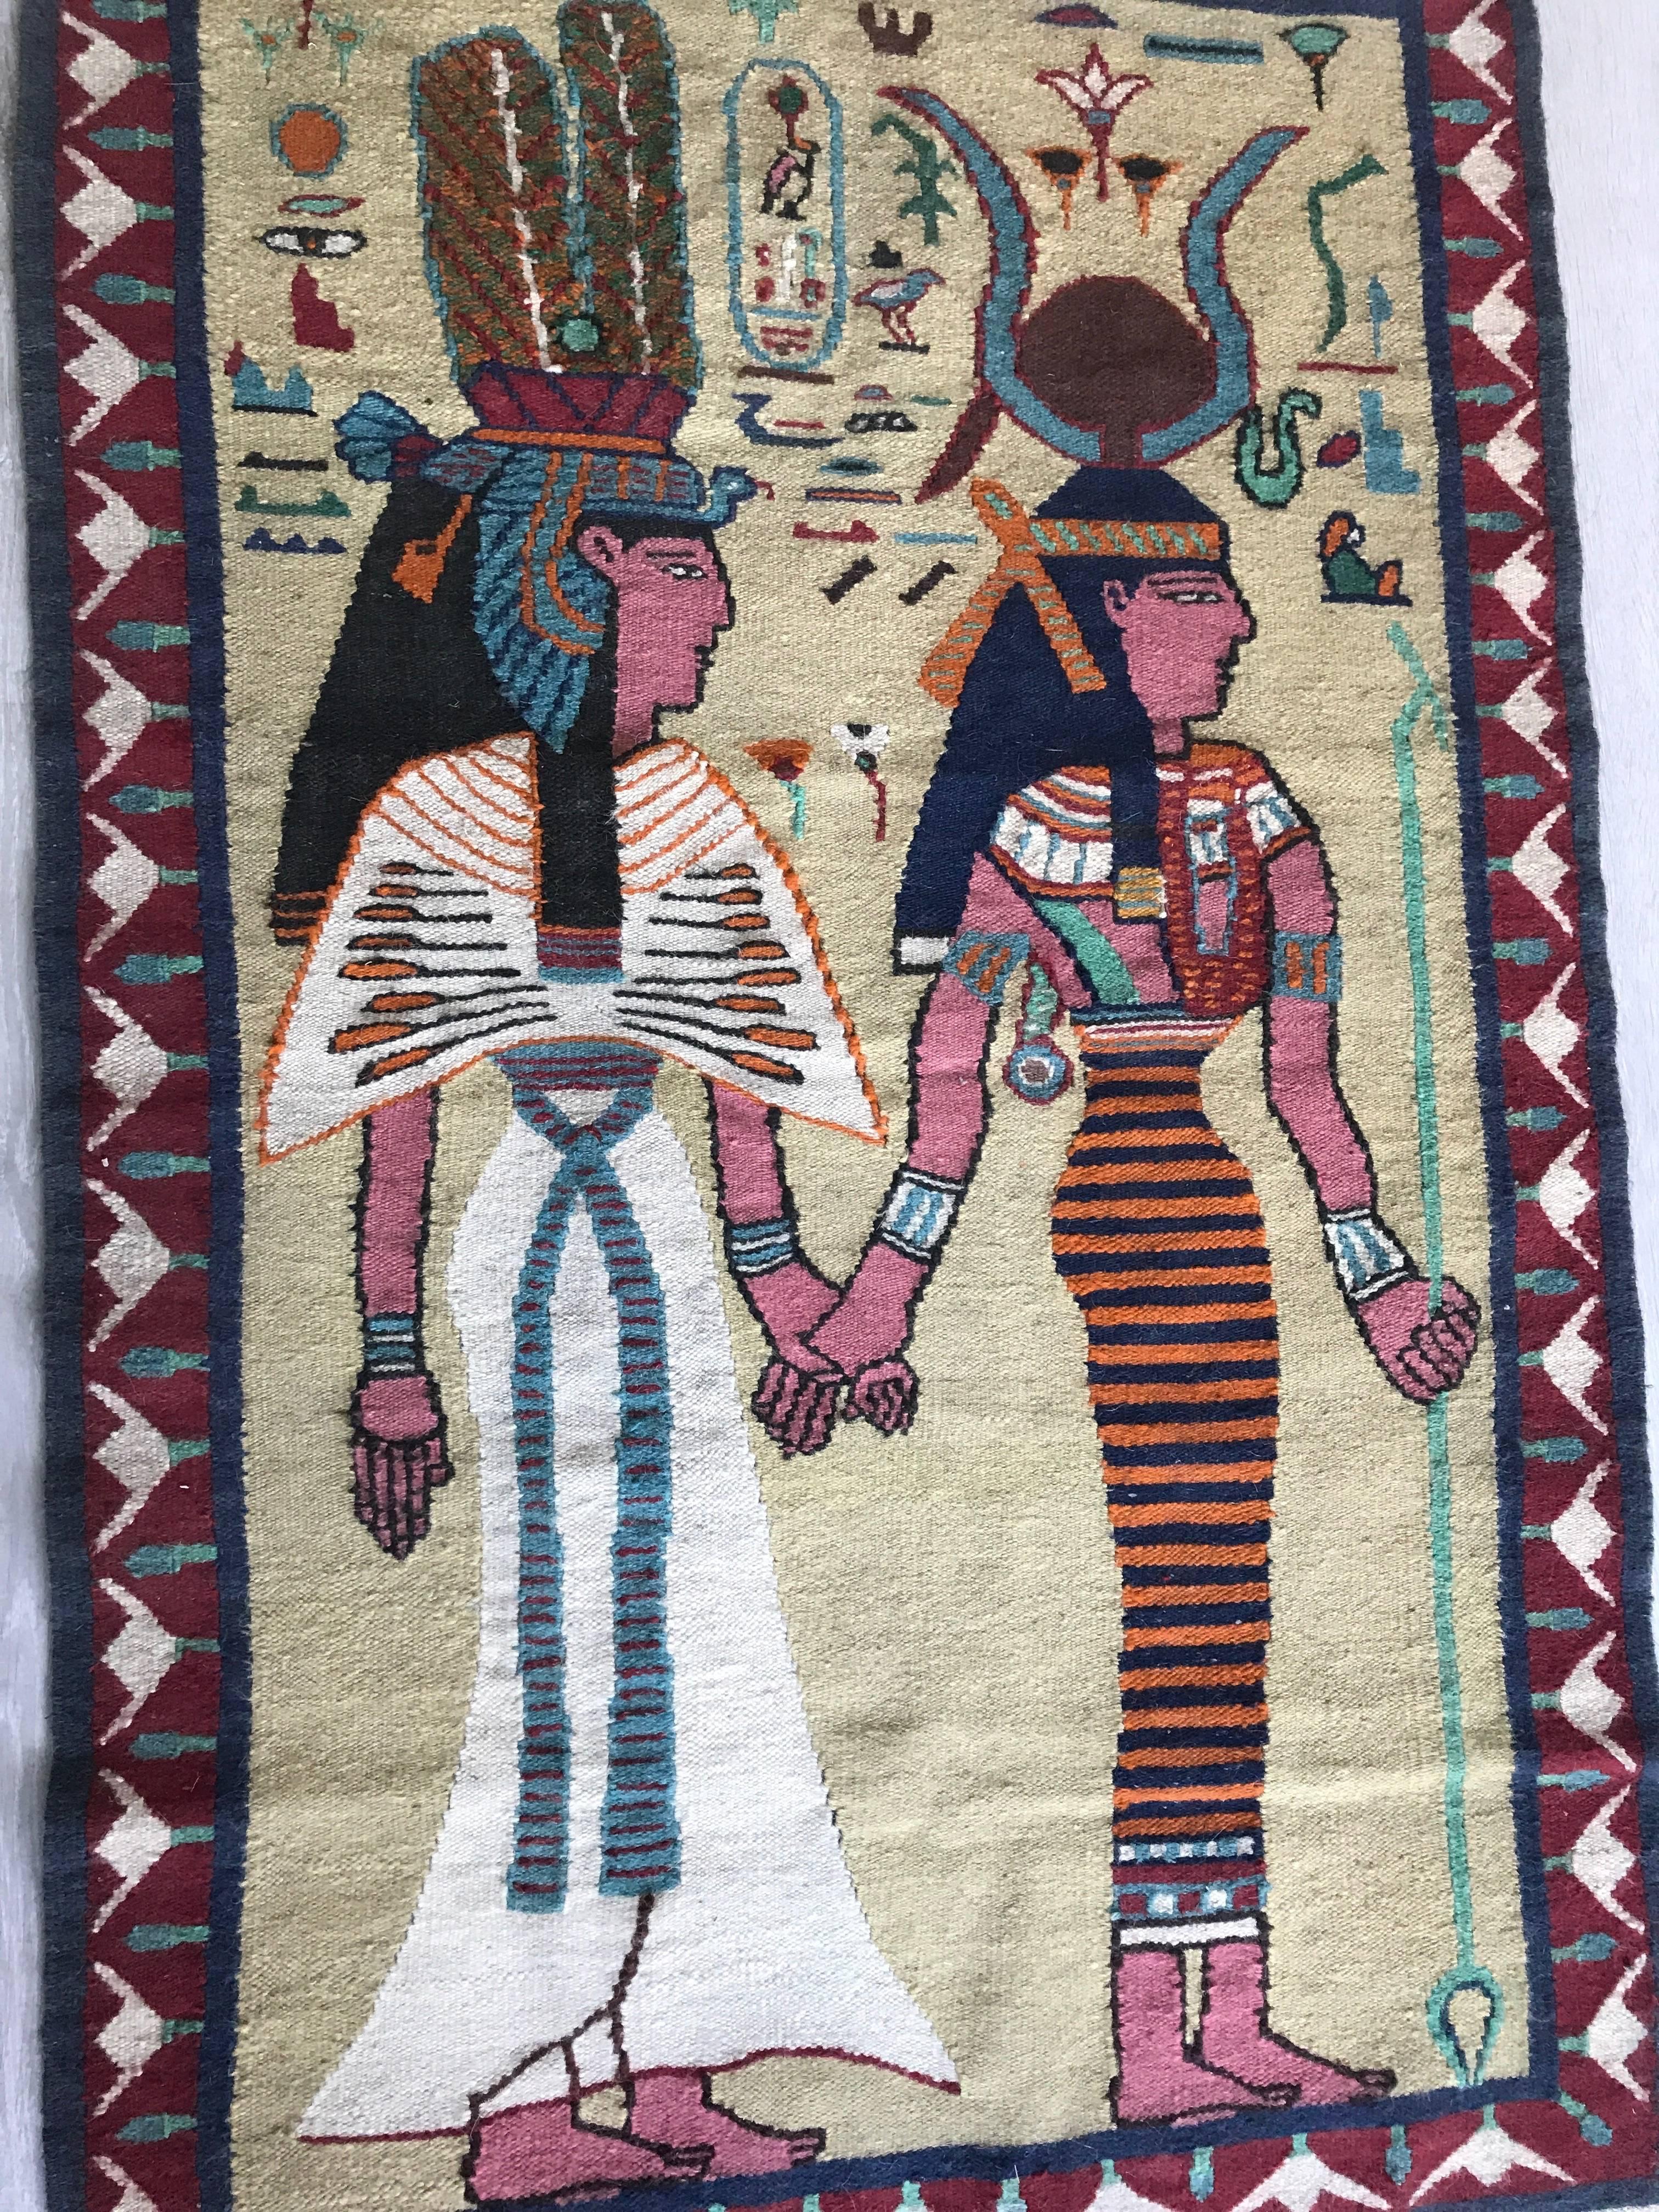 Near antique carpet depicting the two goddesses Isis and Hathor.

This rare and handwoven carpet depicting two symbols of Egyptian spirituality can also be used as wall hanging. This is a unique opportunity for Egyptologists and for lovers and